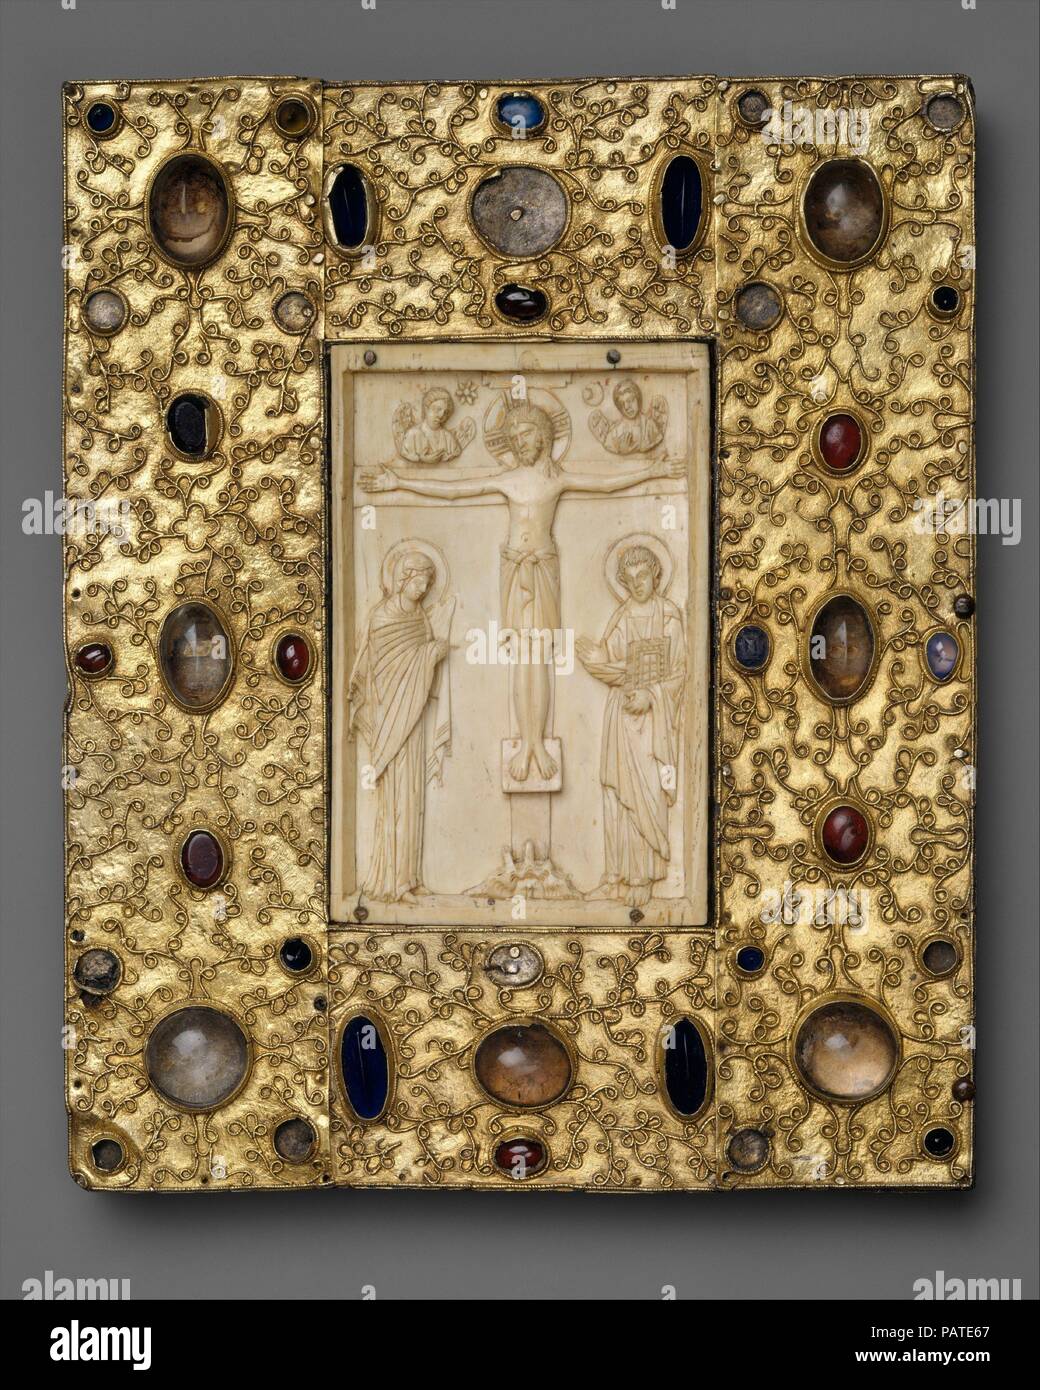 Book Cover with Byzantine Icon of the Crucifixion. Culture: Byzantine (ivory); Spanish (setting). Dimensions: Overall: 10 3/8 x 8 5/8 x 1 in. (26.4 x 21.9 x 2.5 cm). Date: 1000 (ivory); before 1085 (setting).  Byzantine ivories were highly prized in western Europe, where they survived in church treasuries or were incorporated into deluxe book bindings. The ivory from the panel on the left originally formed the center of a Byzantine three-paneled icon. It may have been one of the many gifts to the Nunnery of Santa Cruz de la Serós, which was founded by Queen Felicia (d. 1085), wife of Sancho V  Stock Photo